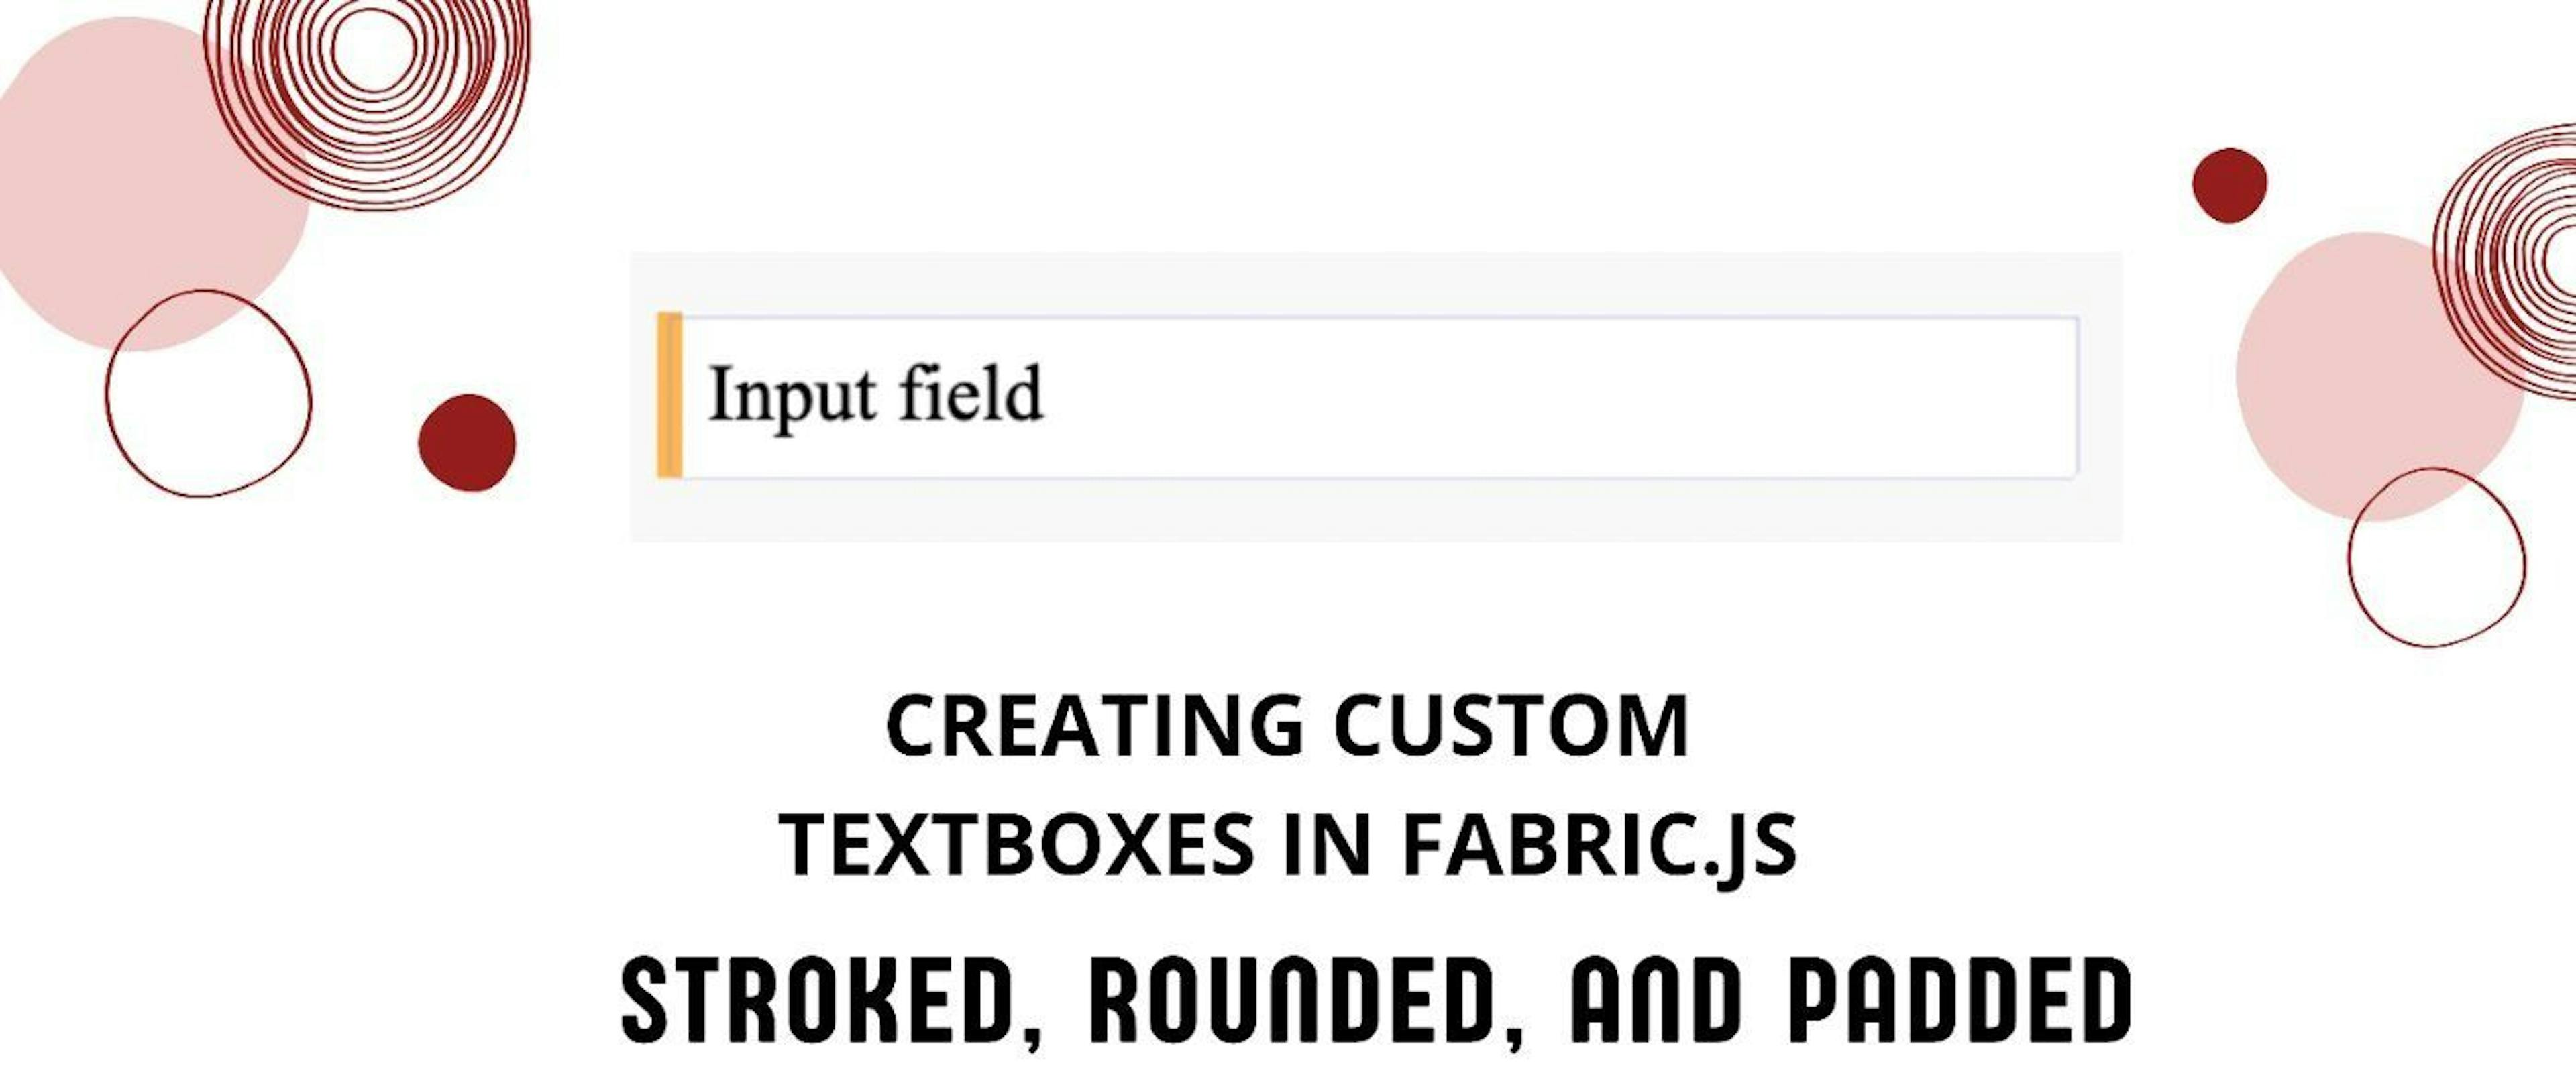 featured image - How to Build Custom Textboxes in Fabric.js: Stroked, Rounded, and Padded